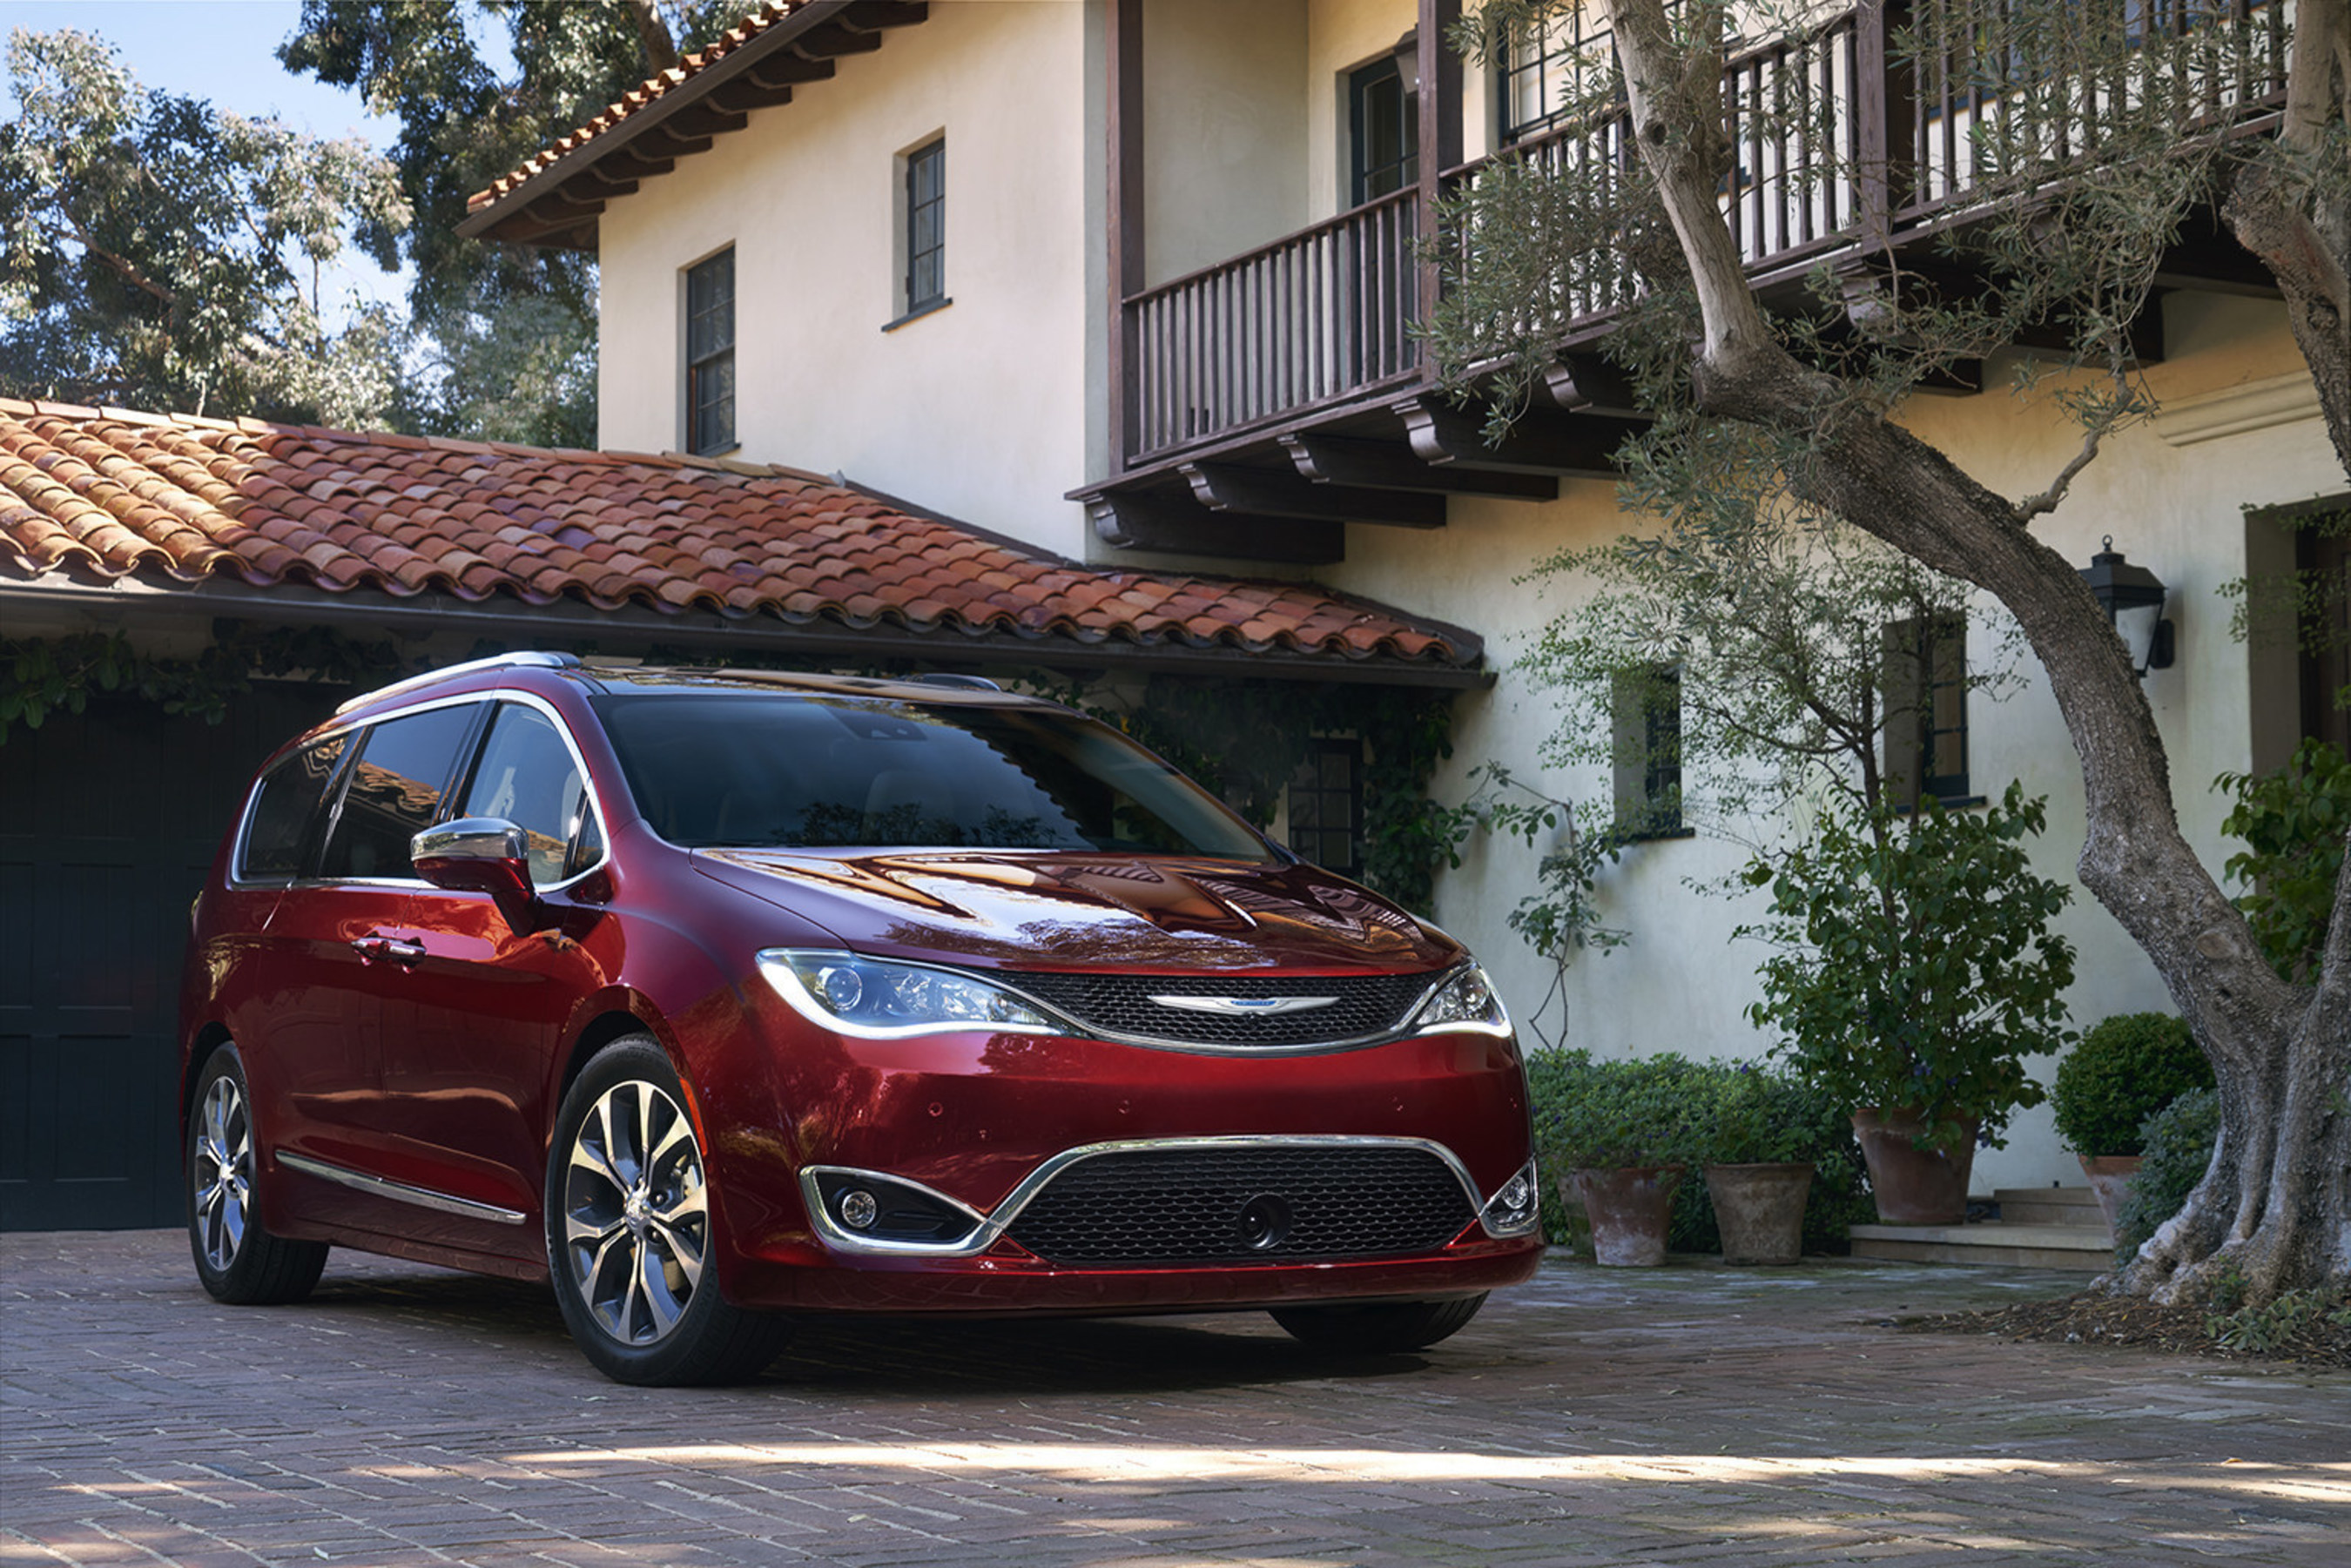 All-new 2017 Chrysler Pacifica reinvents the minivan segment with an unprecedented level of functionality, versatility and technology.